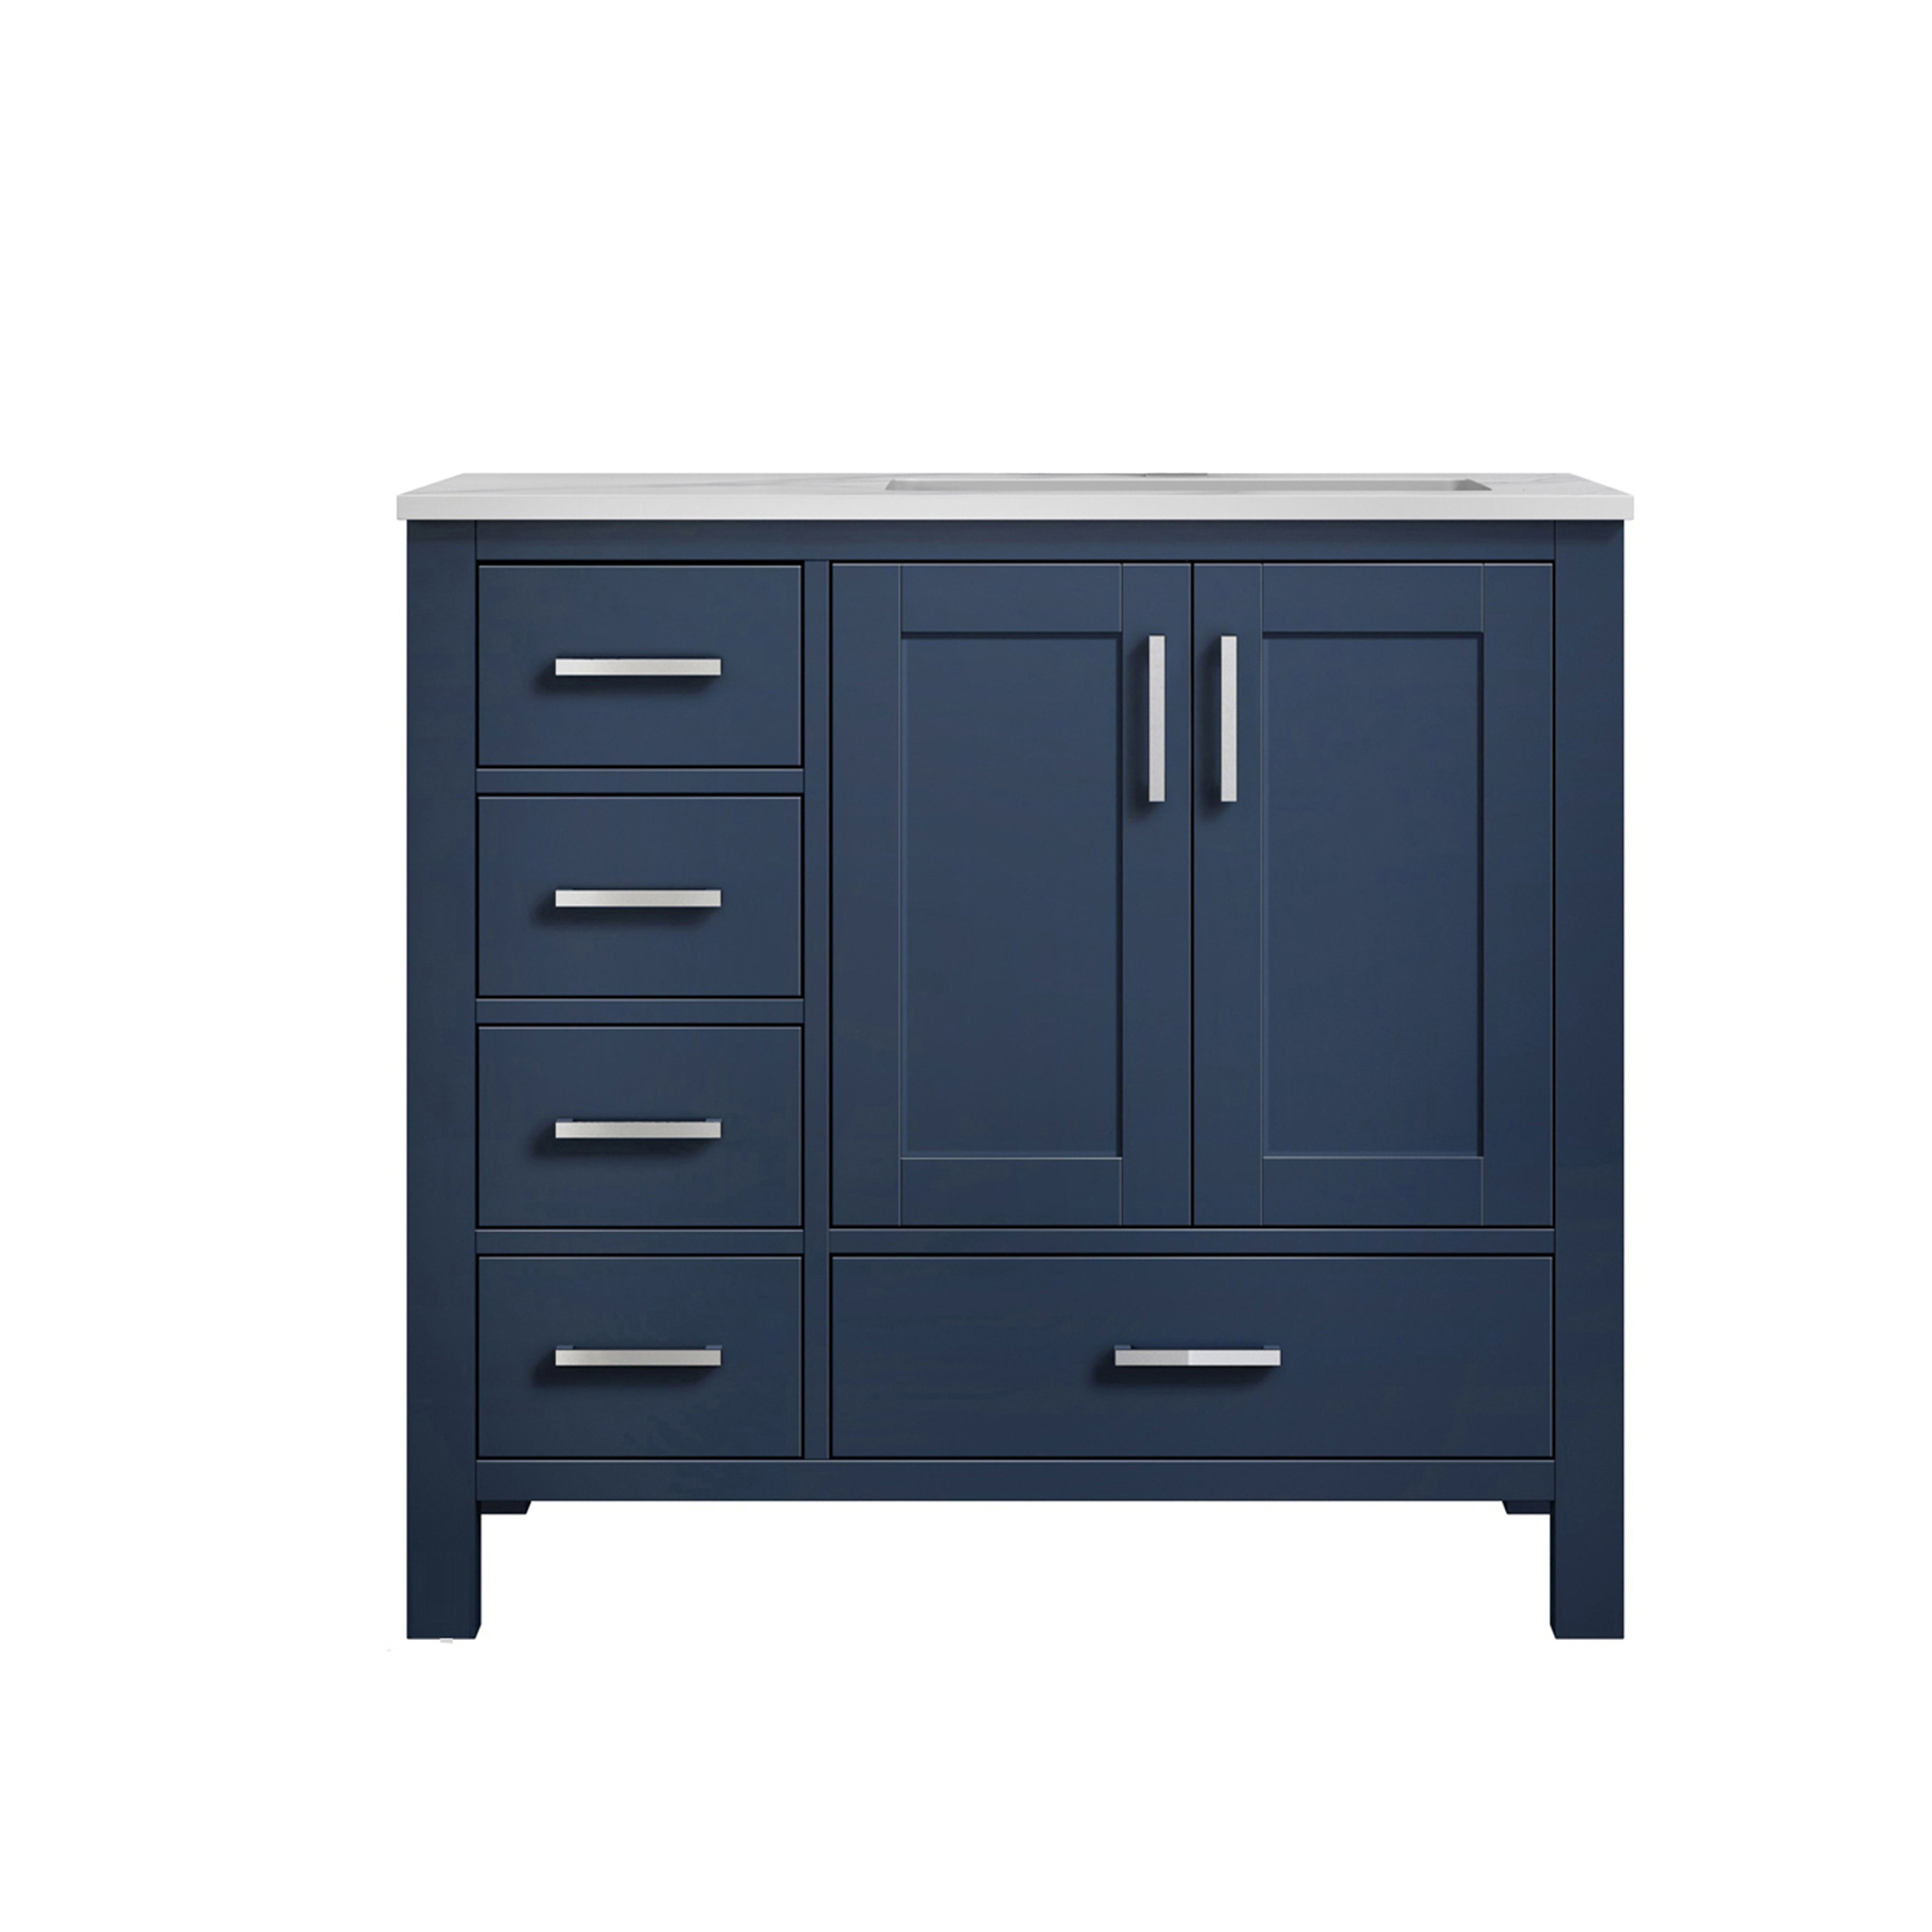 Lexora Jacques LJ342236SEDS000-R 36" Single Bathroom Vanity in Navy Blue with White Carrara Marble, White Rectangle Sink on Right, Front View